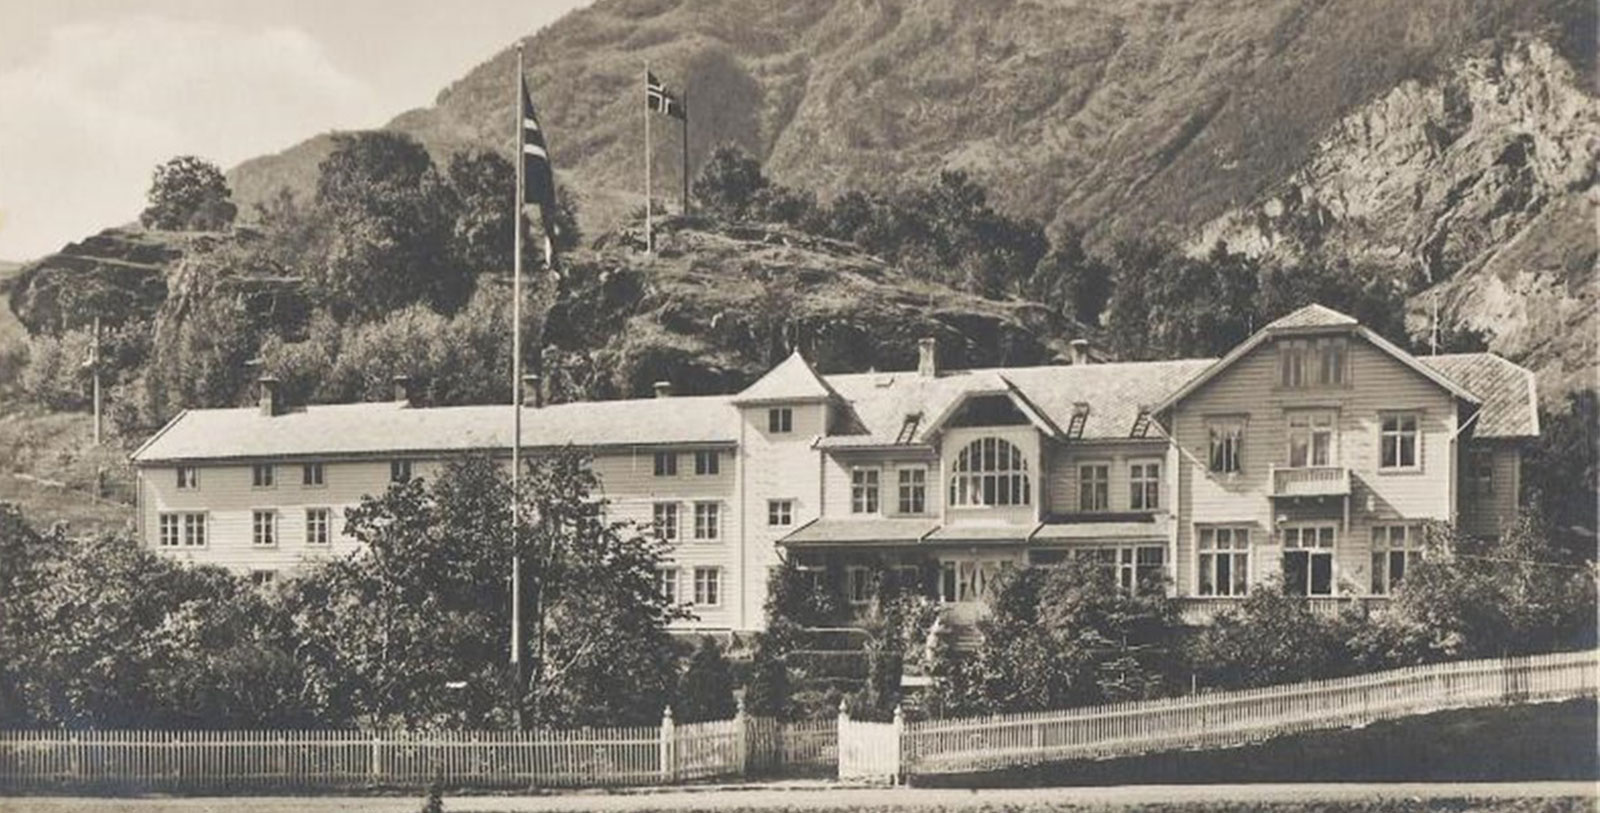 Image of Historic hotel exterior and surroundings, Fretheim Hotel, Flam, Norway, 1870, Member of Historic Hotels Worldwide, History